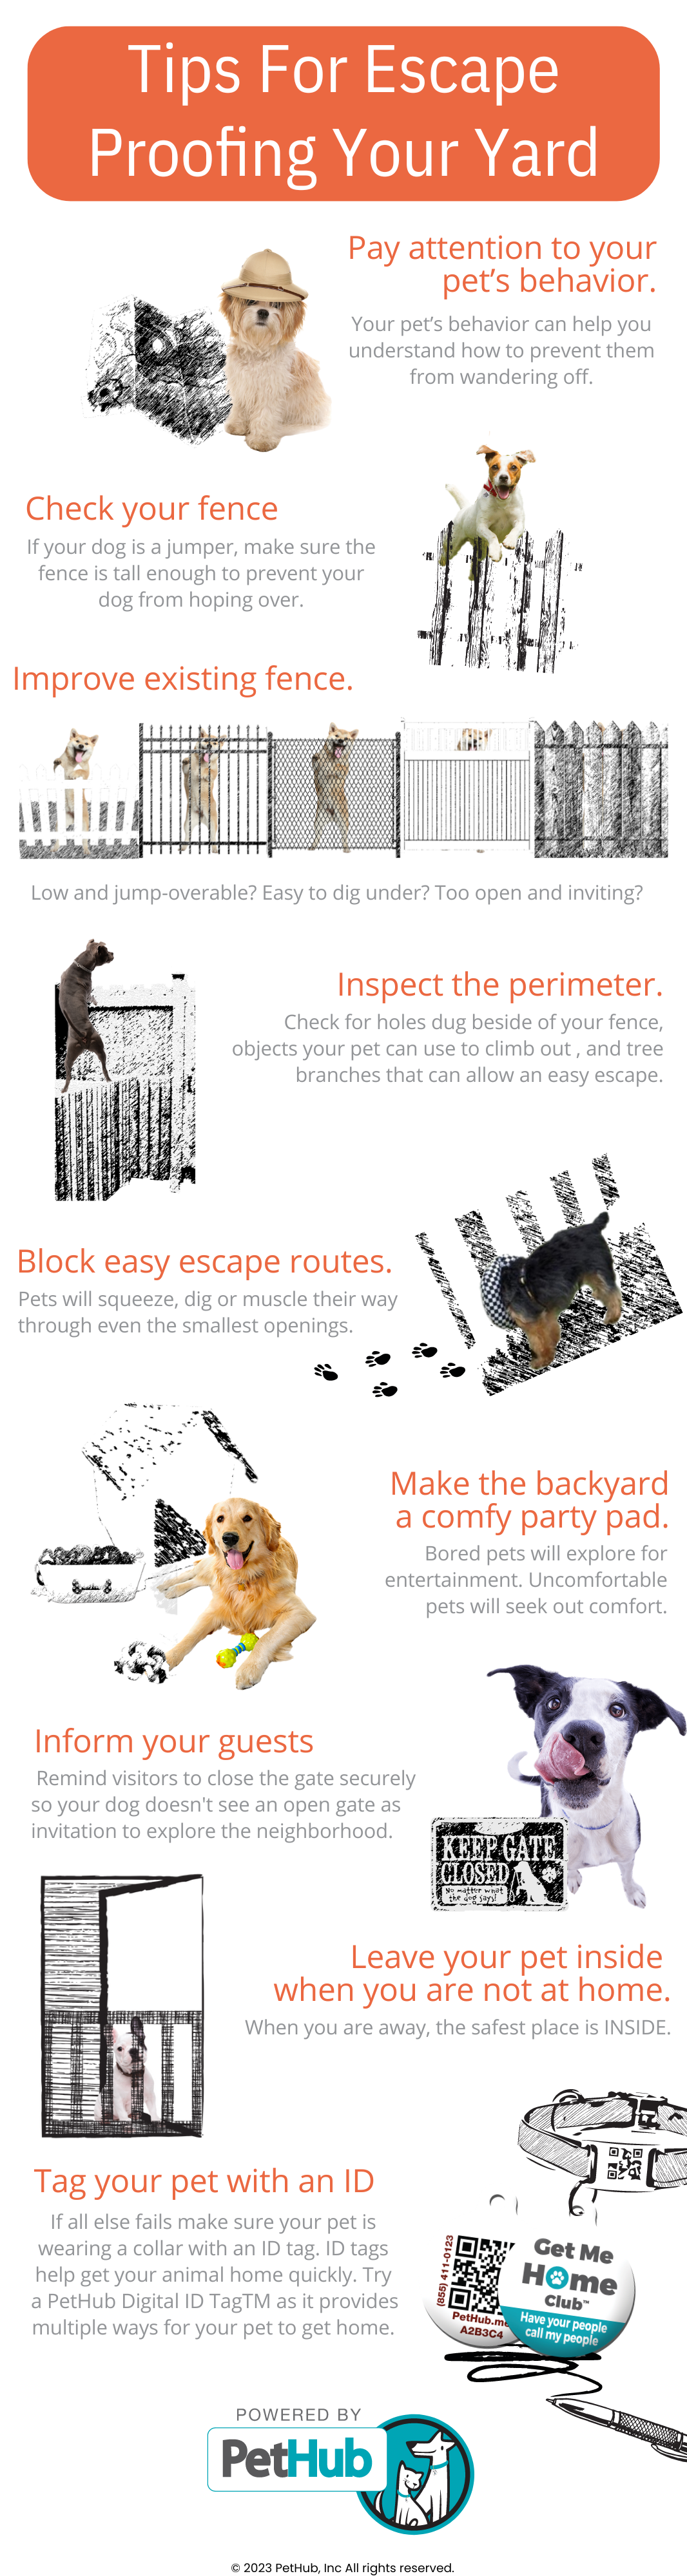 An infographic showing 9 ways to make your yard secure so pets can't escape and get lost.